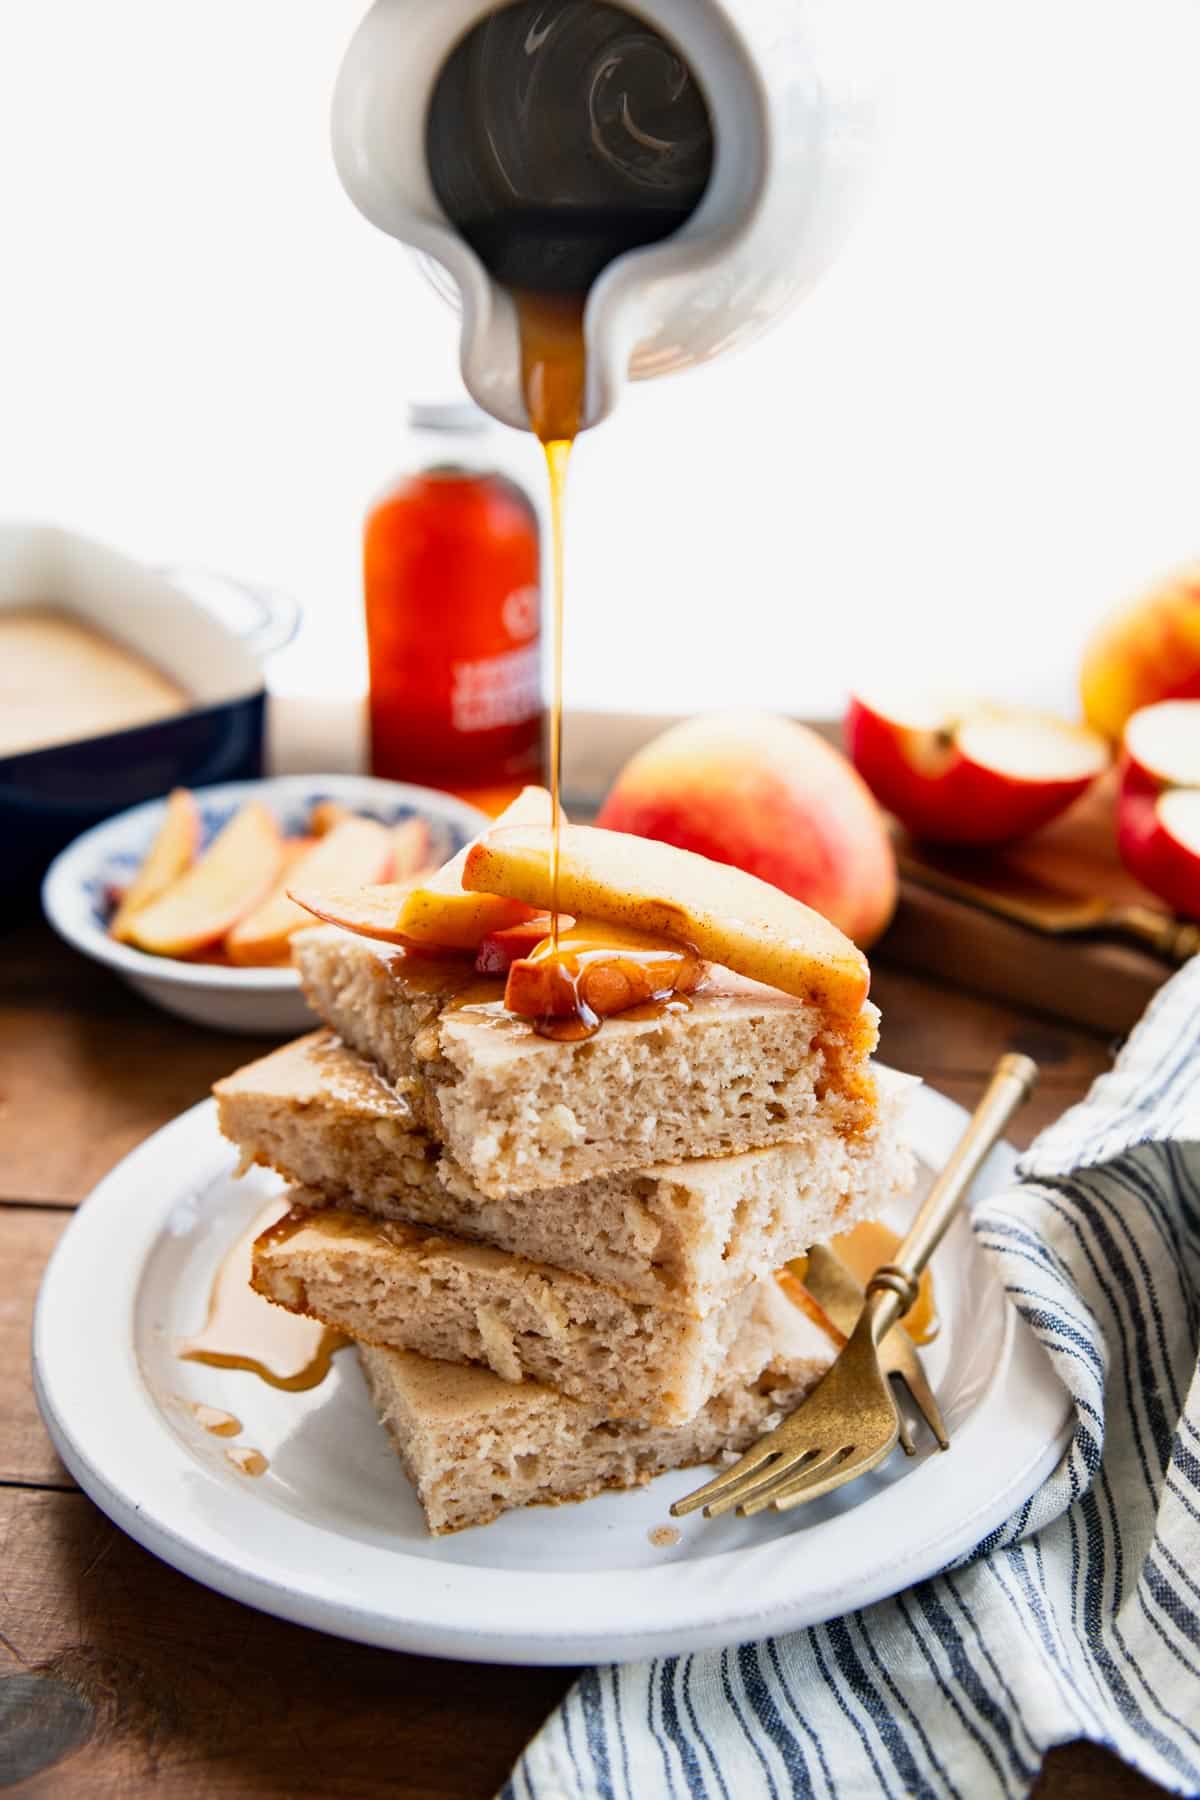 Pouring maple syrup on a plate of baked apple pancakes.